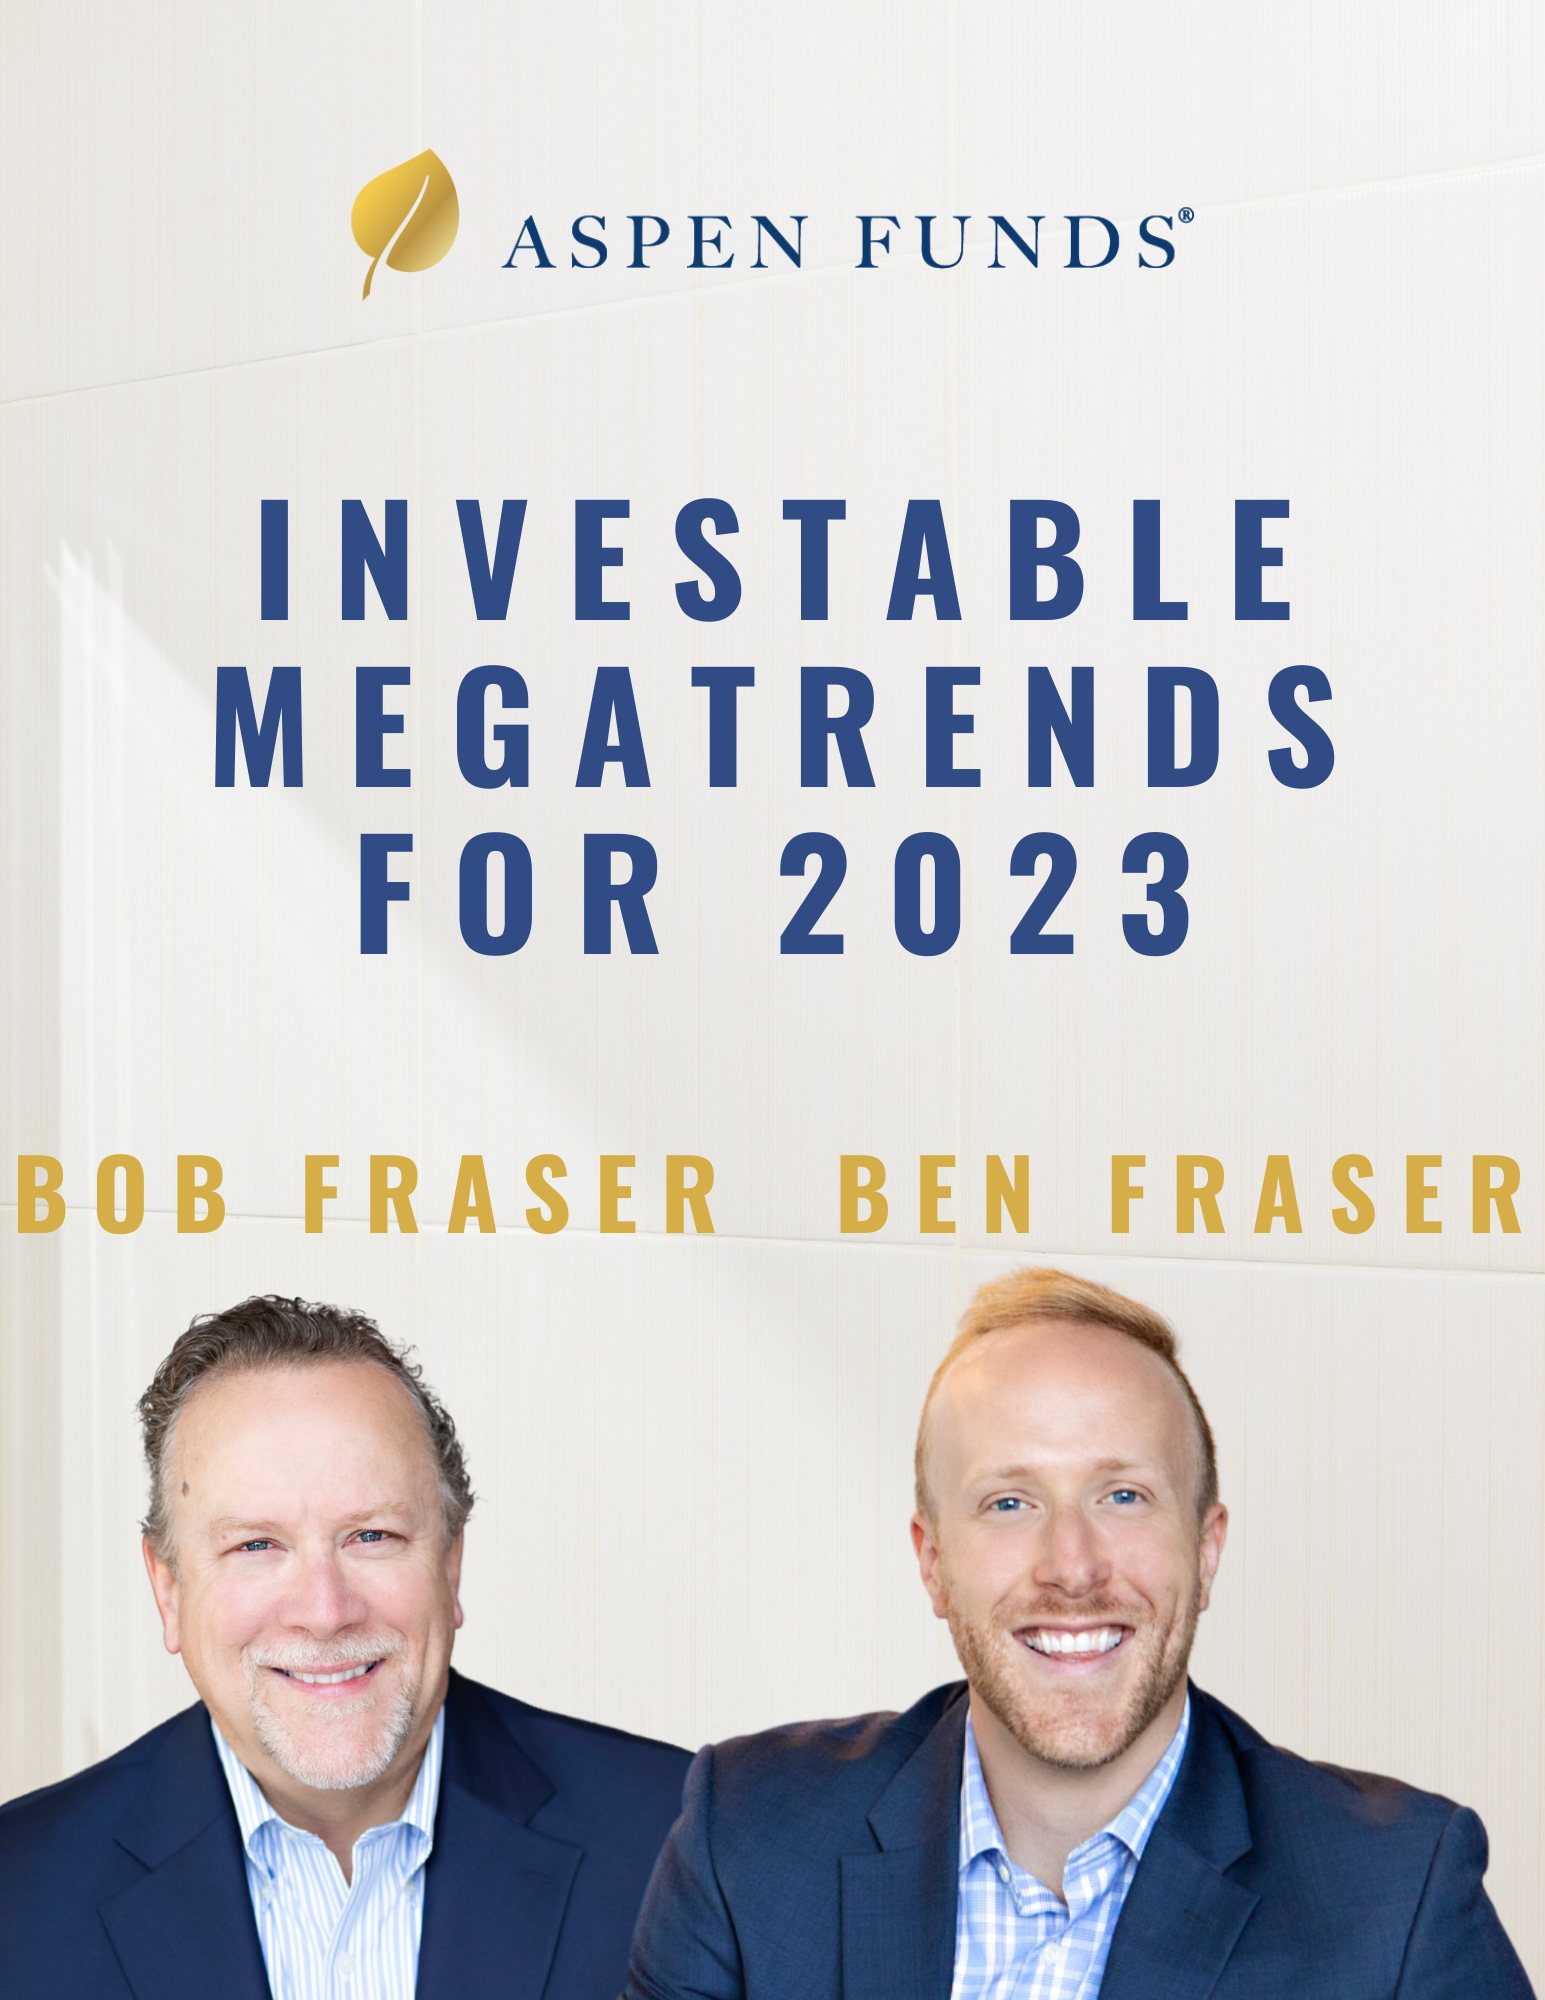 Investable Megatrends for 2023